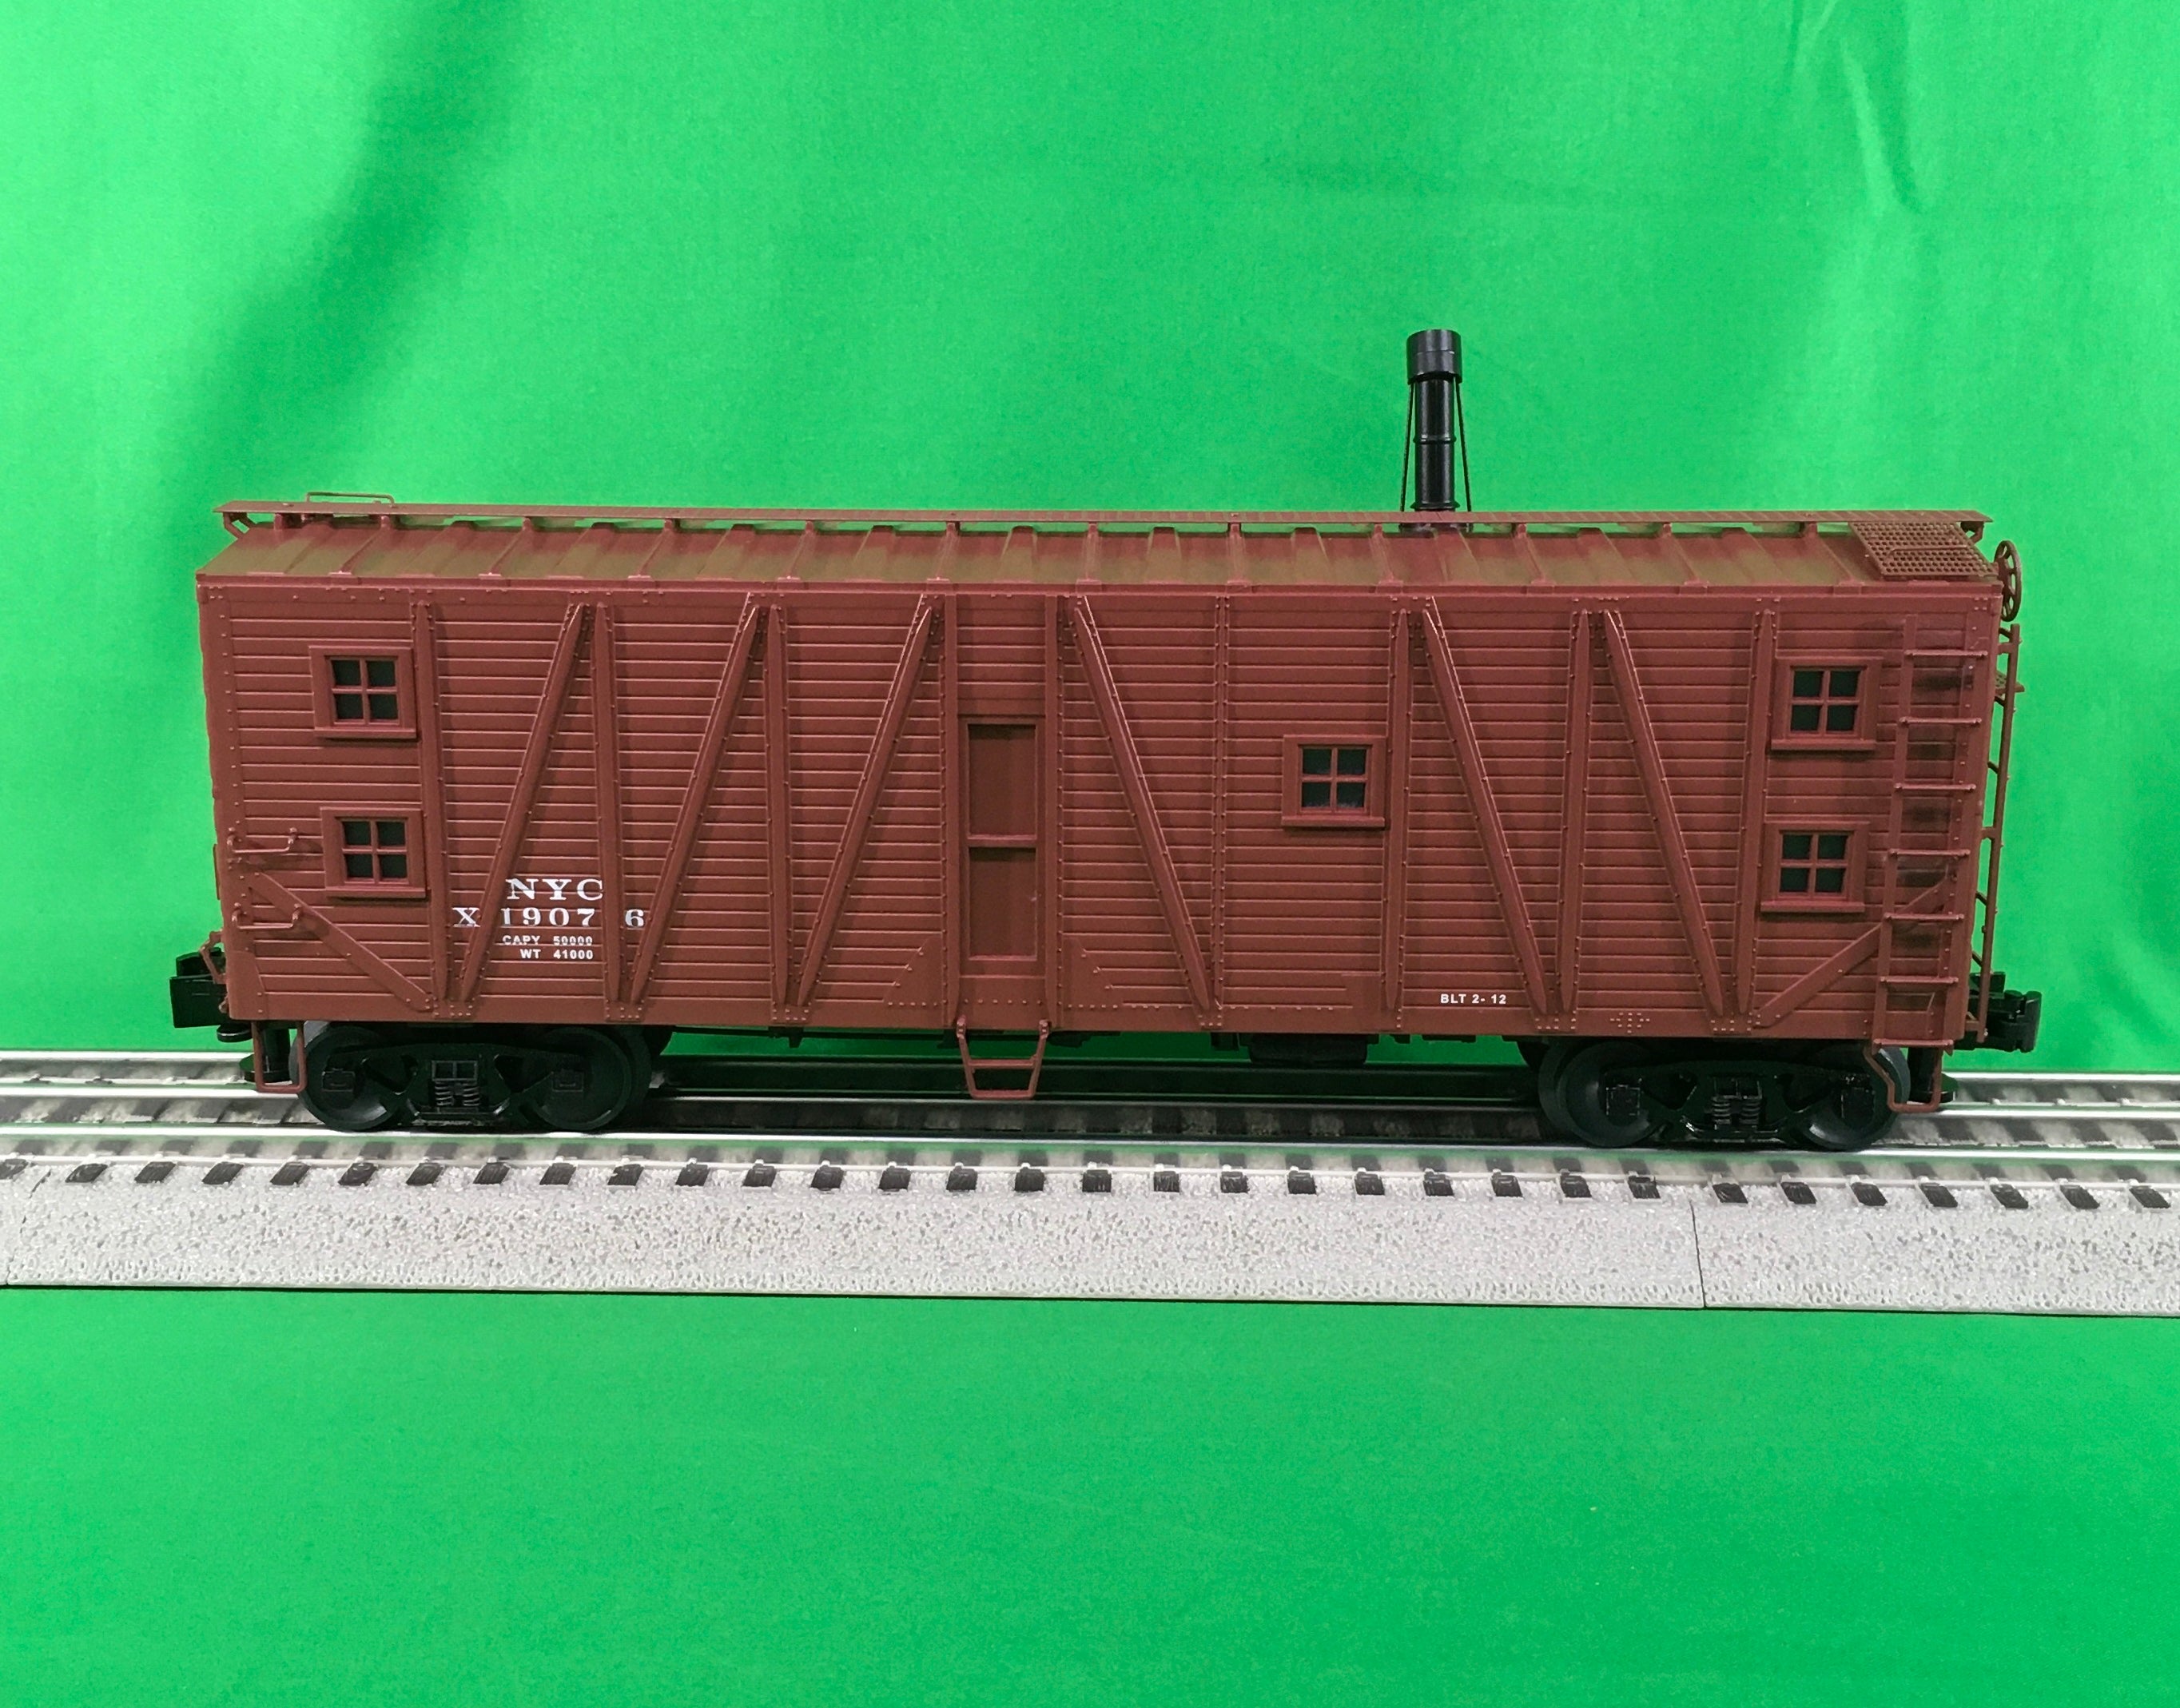 Lionel 1926152 - Bunk Car "New York Central" #x19076